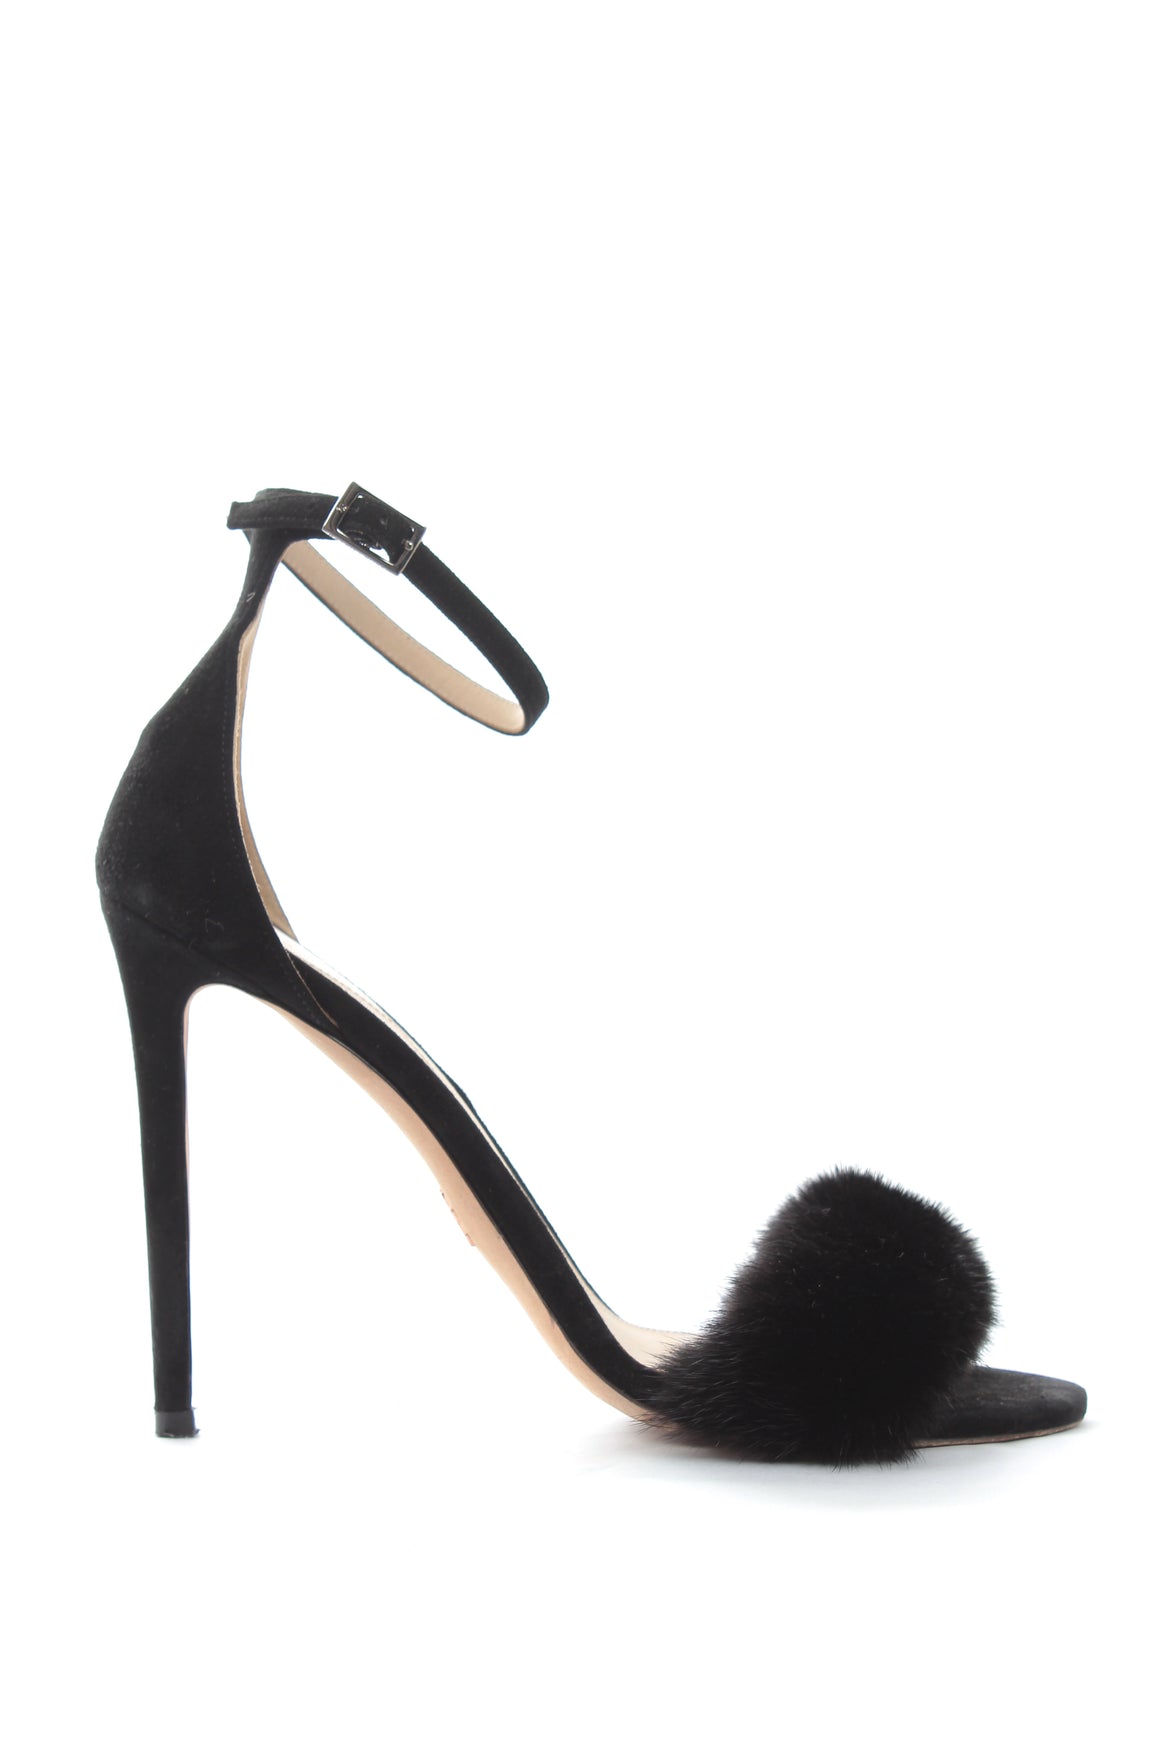 Ralph & Russo Mink and Suede Sandals